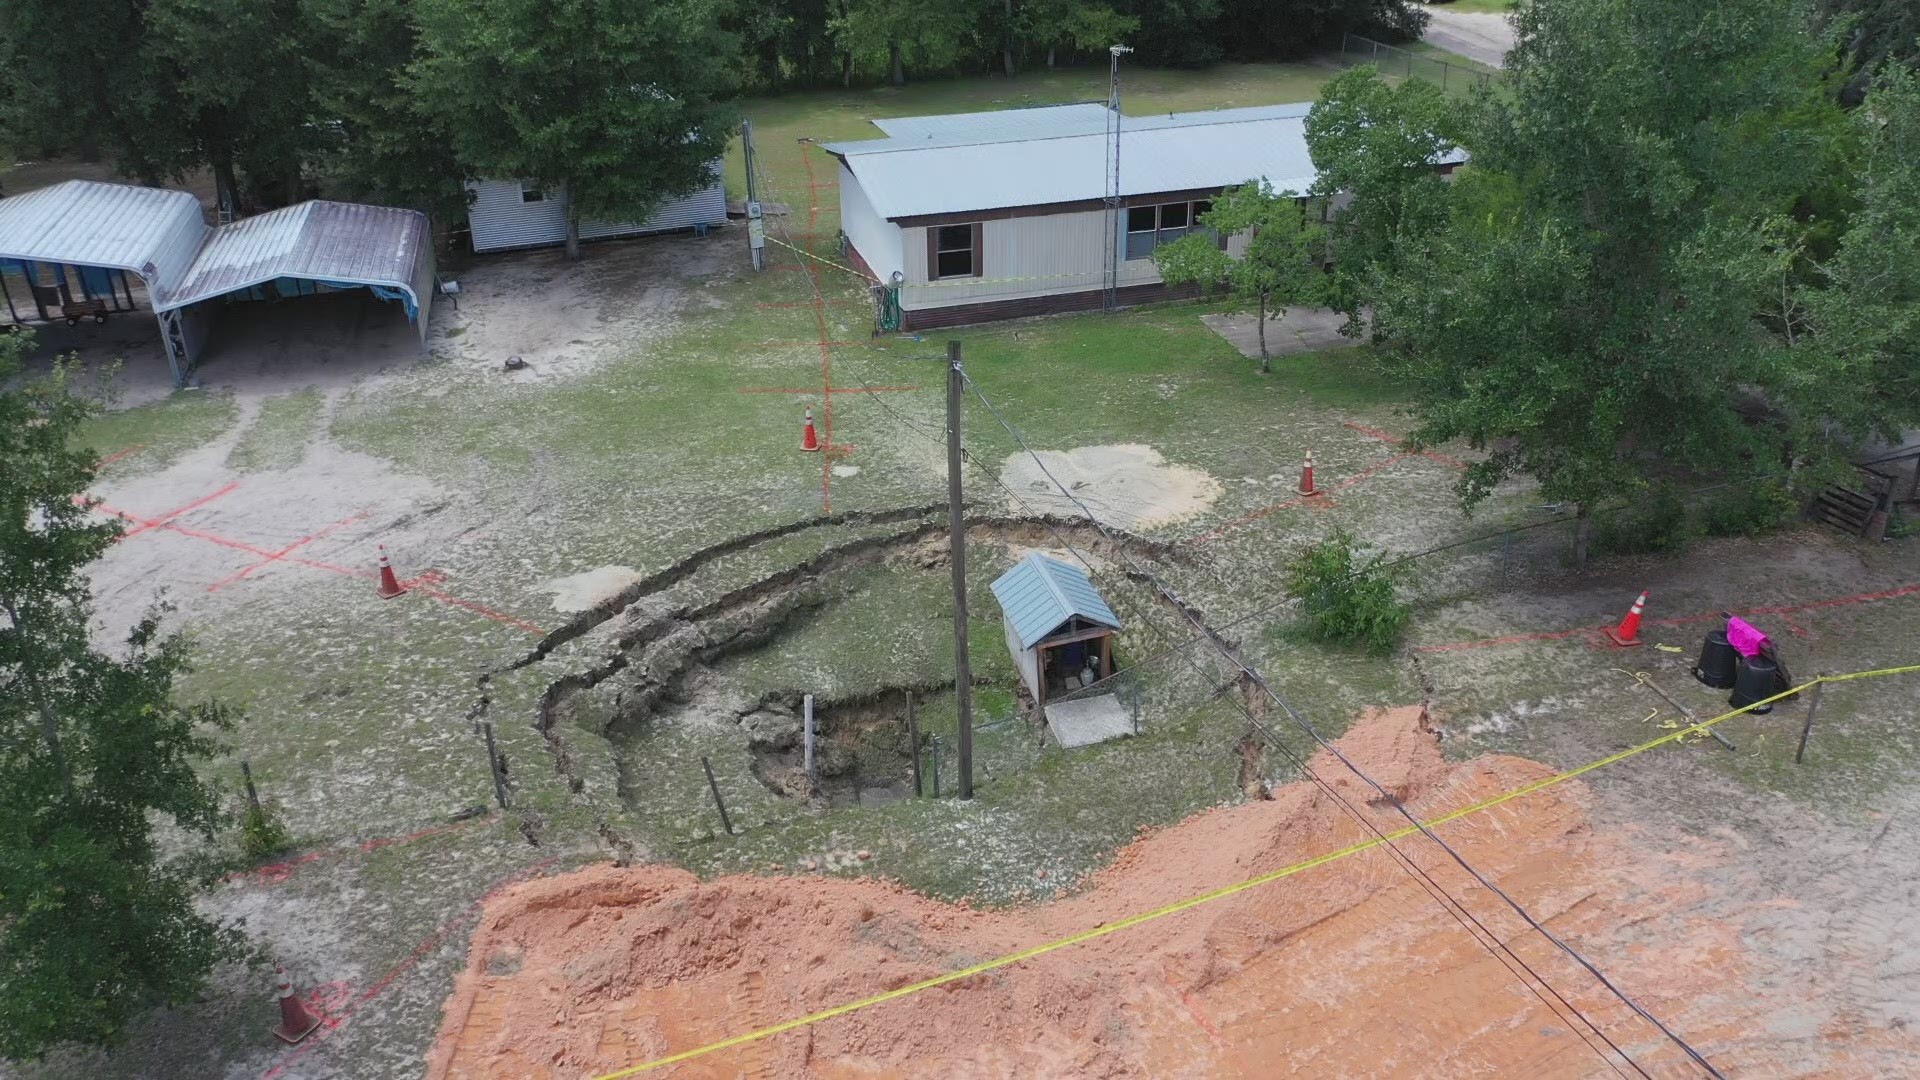 A 60-foot sinkhole in Clay County is getting even bigger, closing nearby roadways, says the Clay County Sheriff's Office.